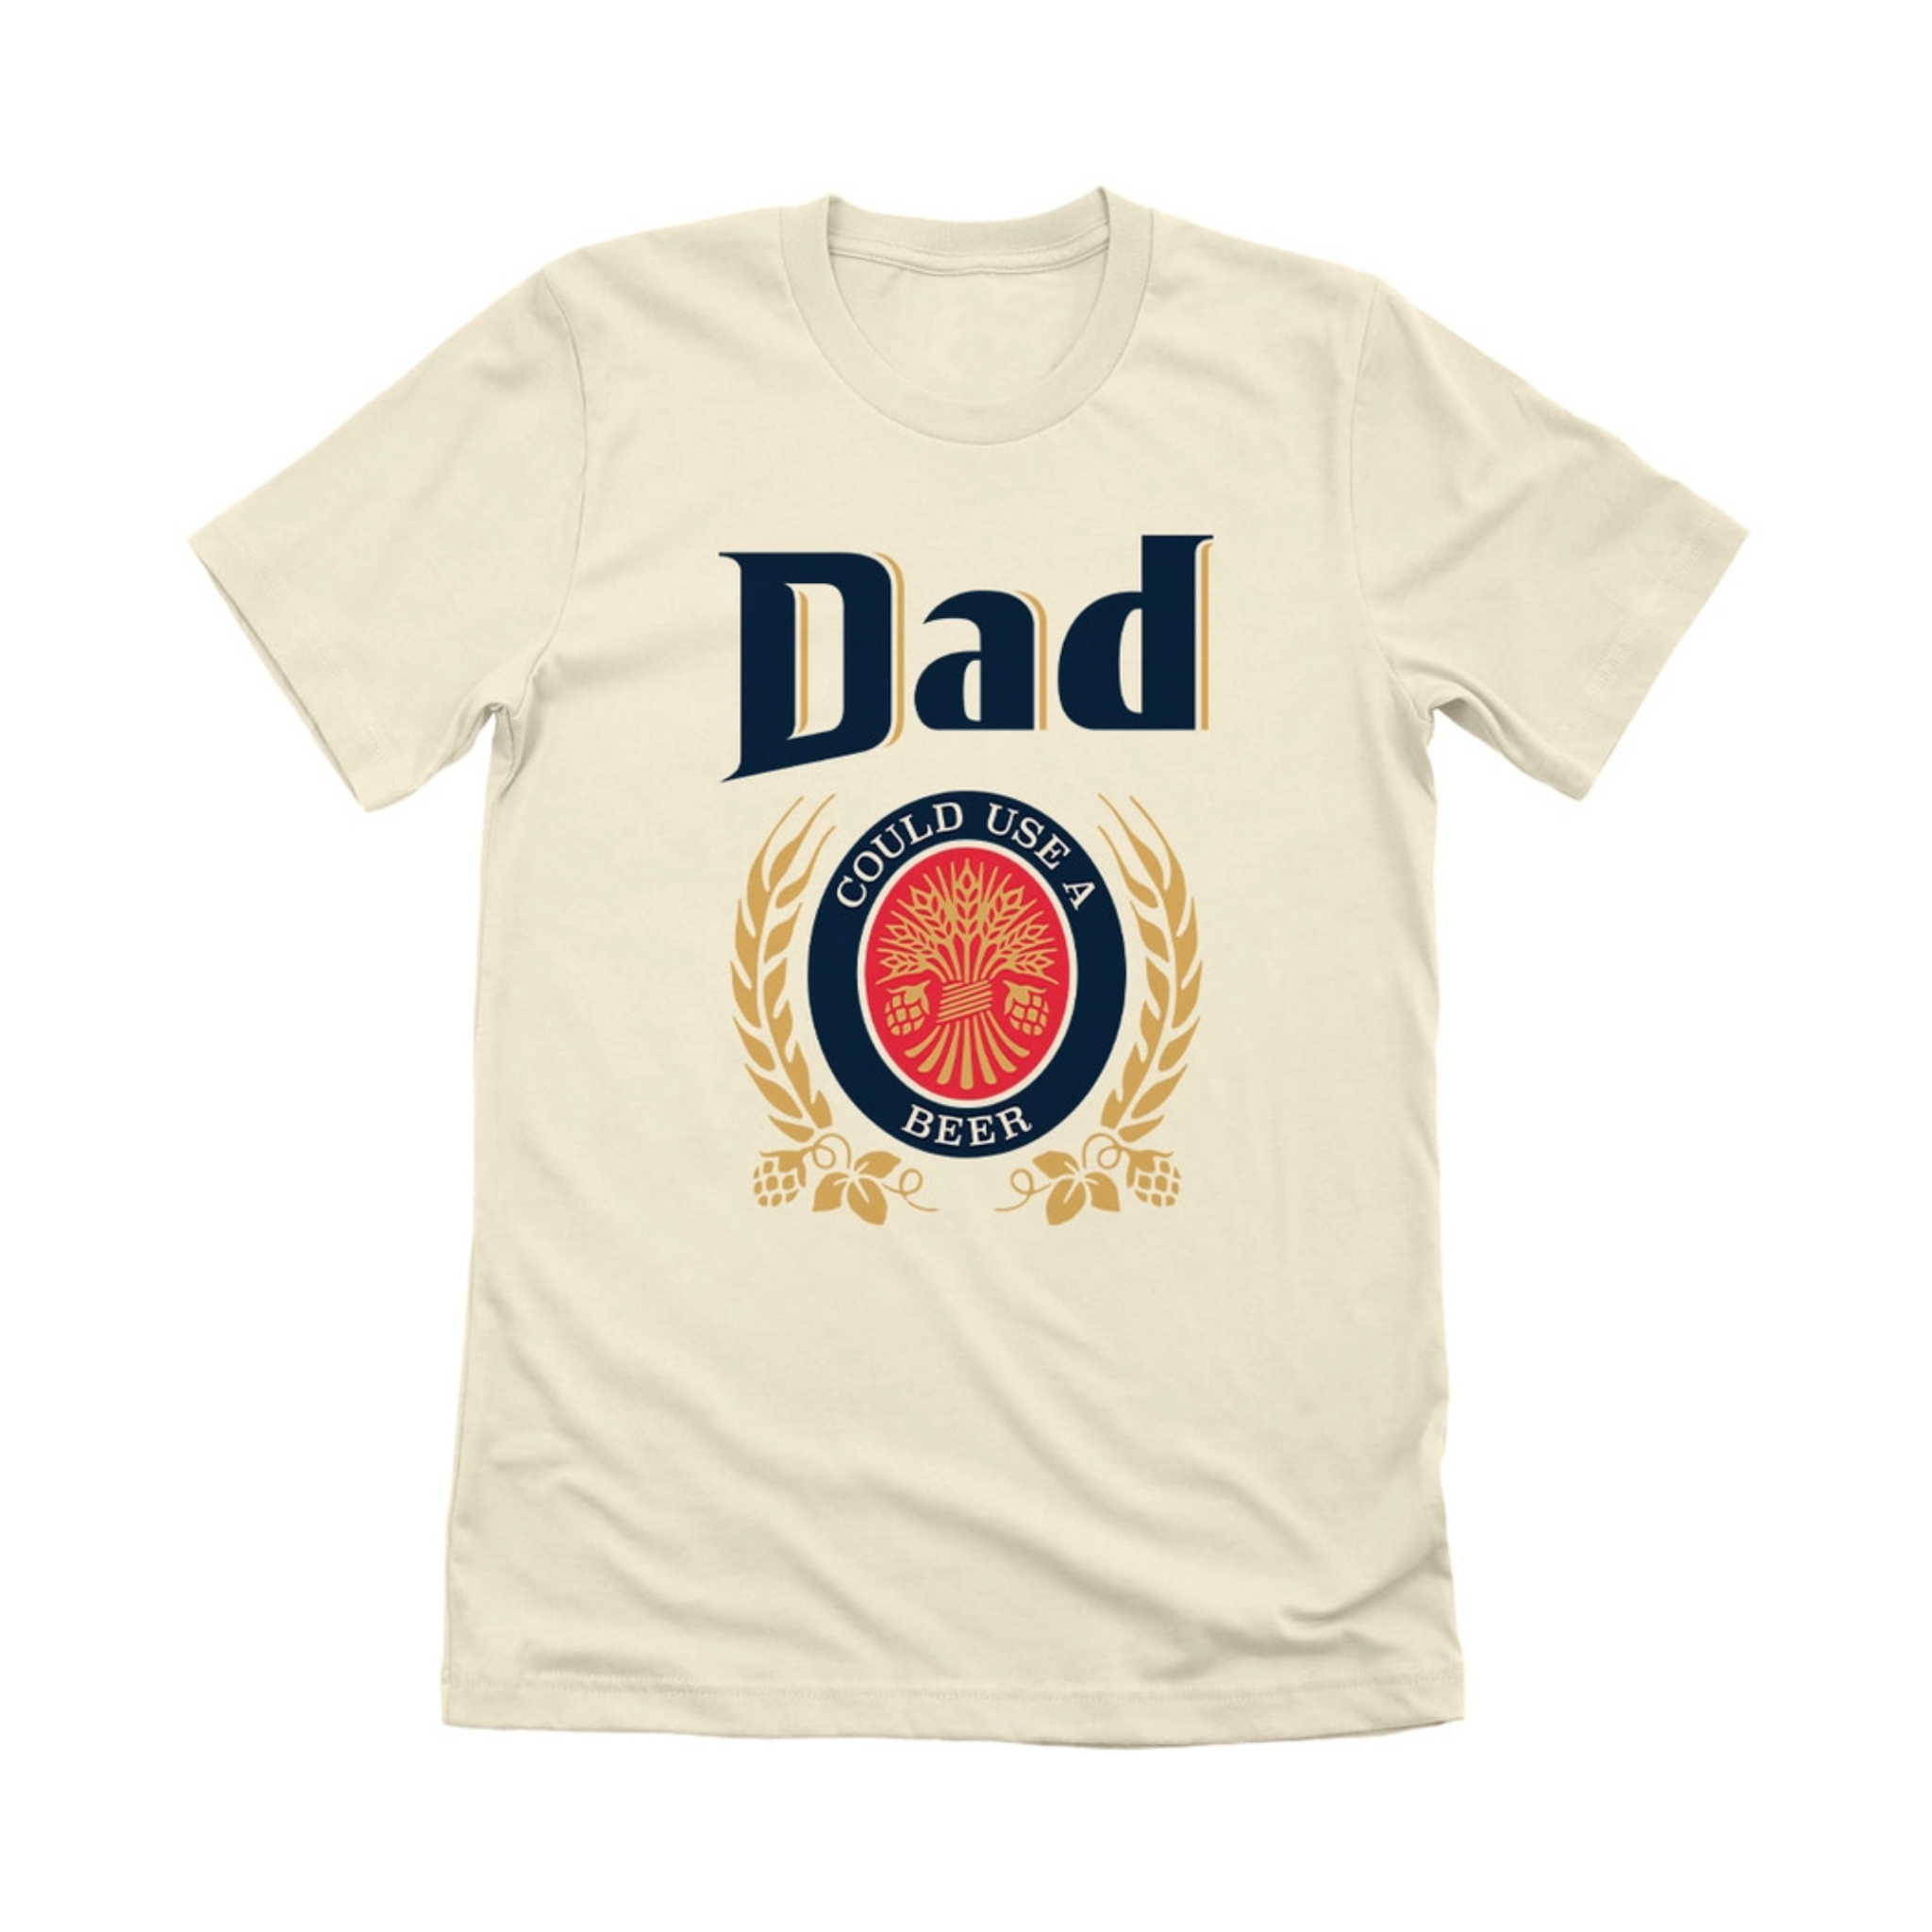 Dad Could Use a Beer Tee 